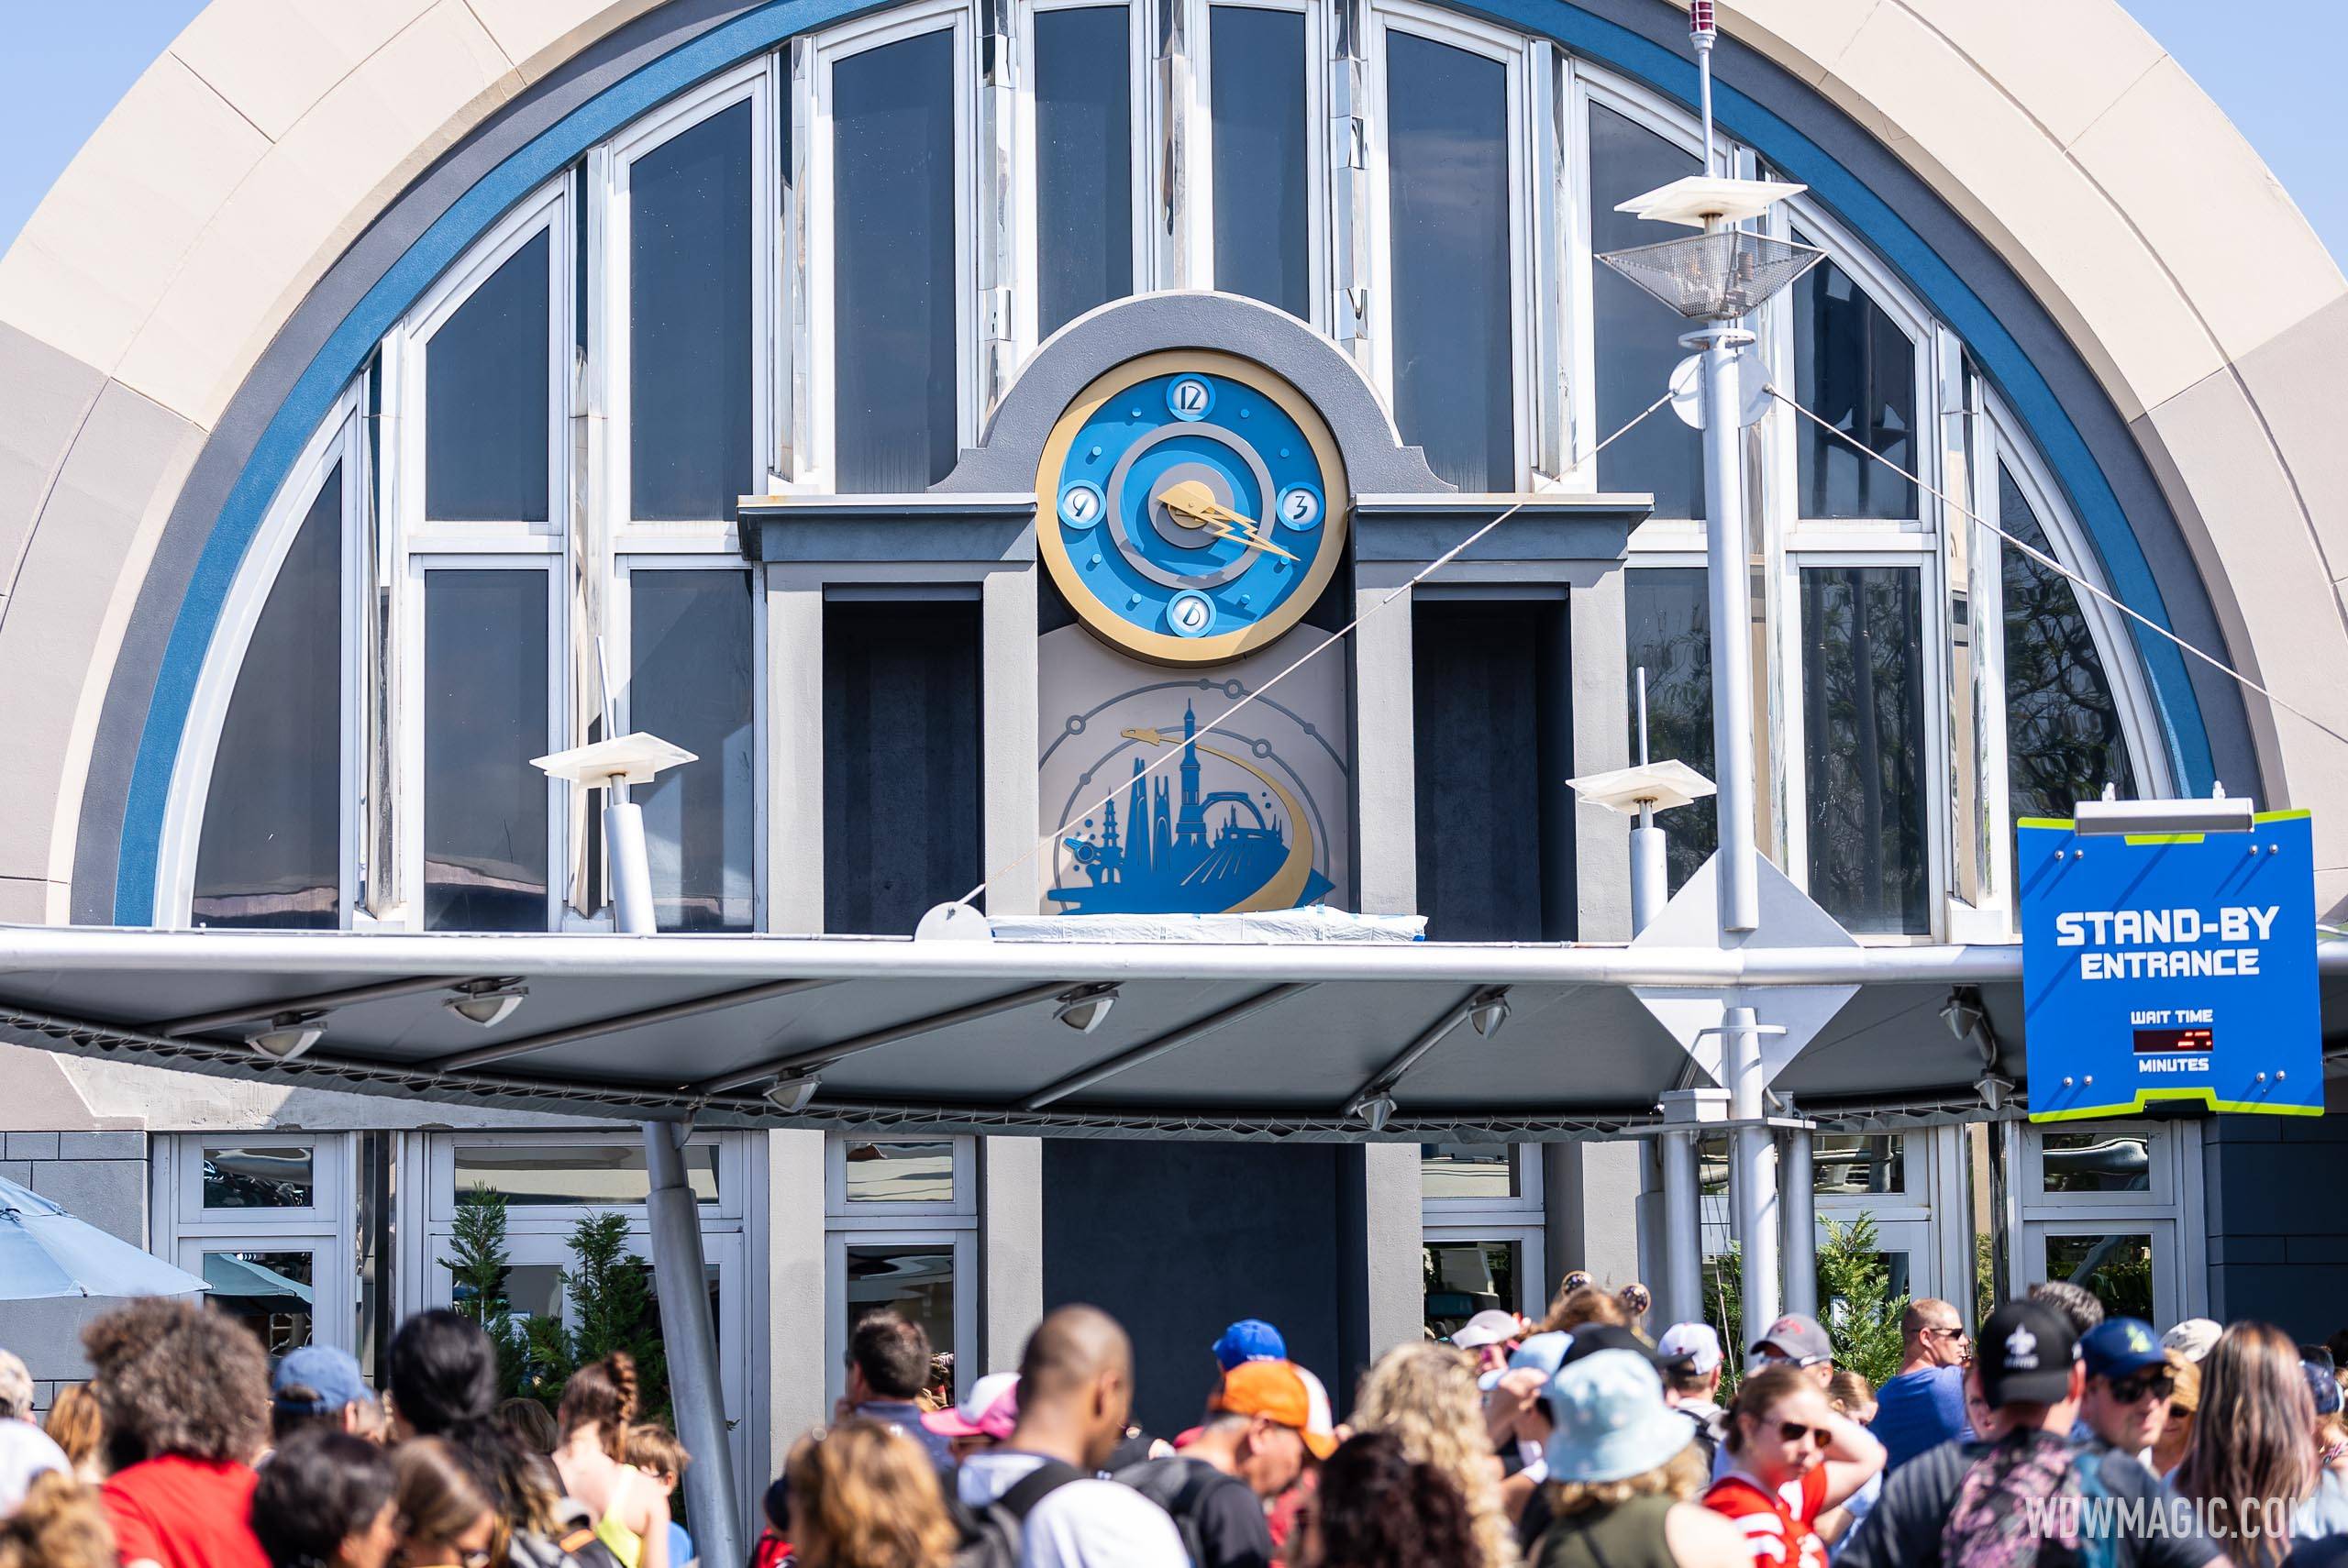 Magic Kingdom's former Tomorrowland Light and Power Co. has a new clock and mural as part of the TRON Lightcycle Run integration